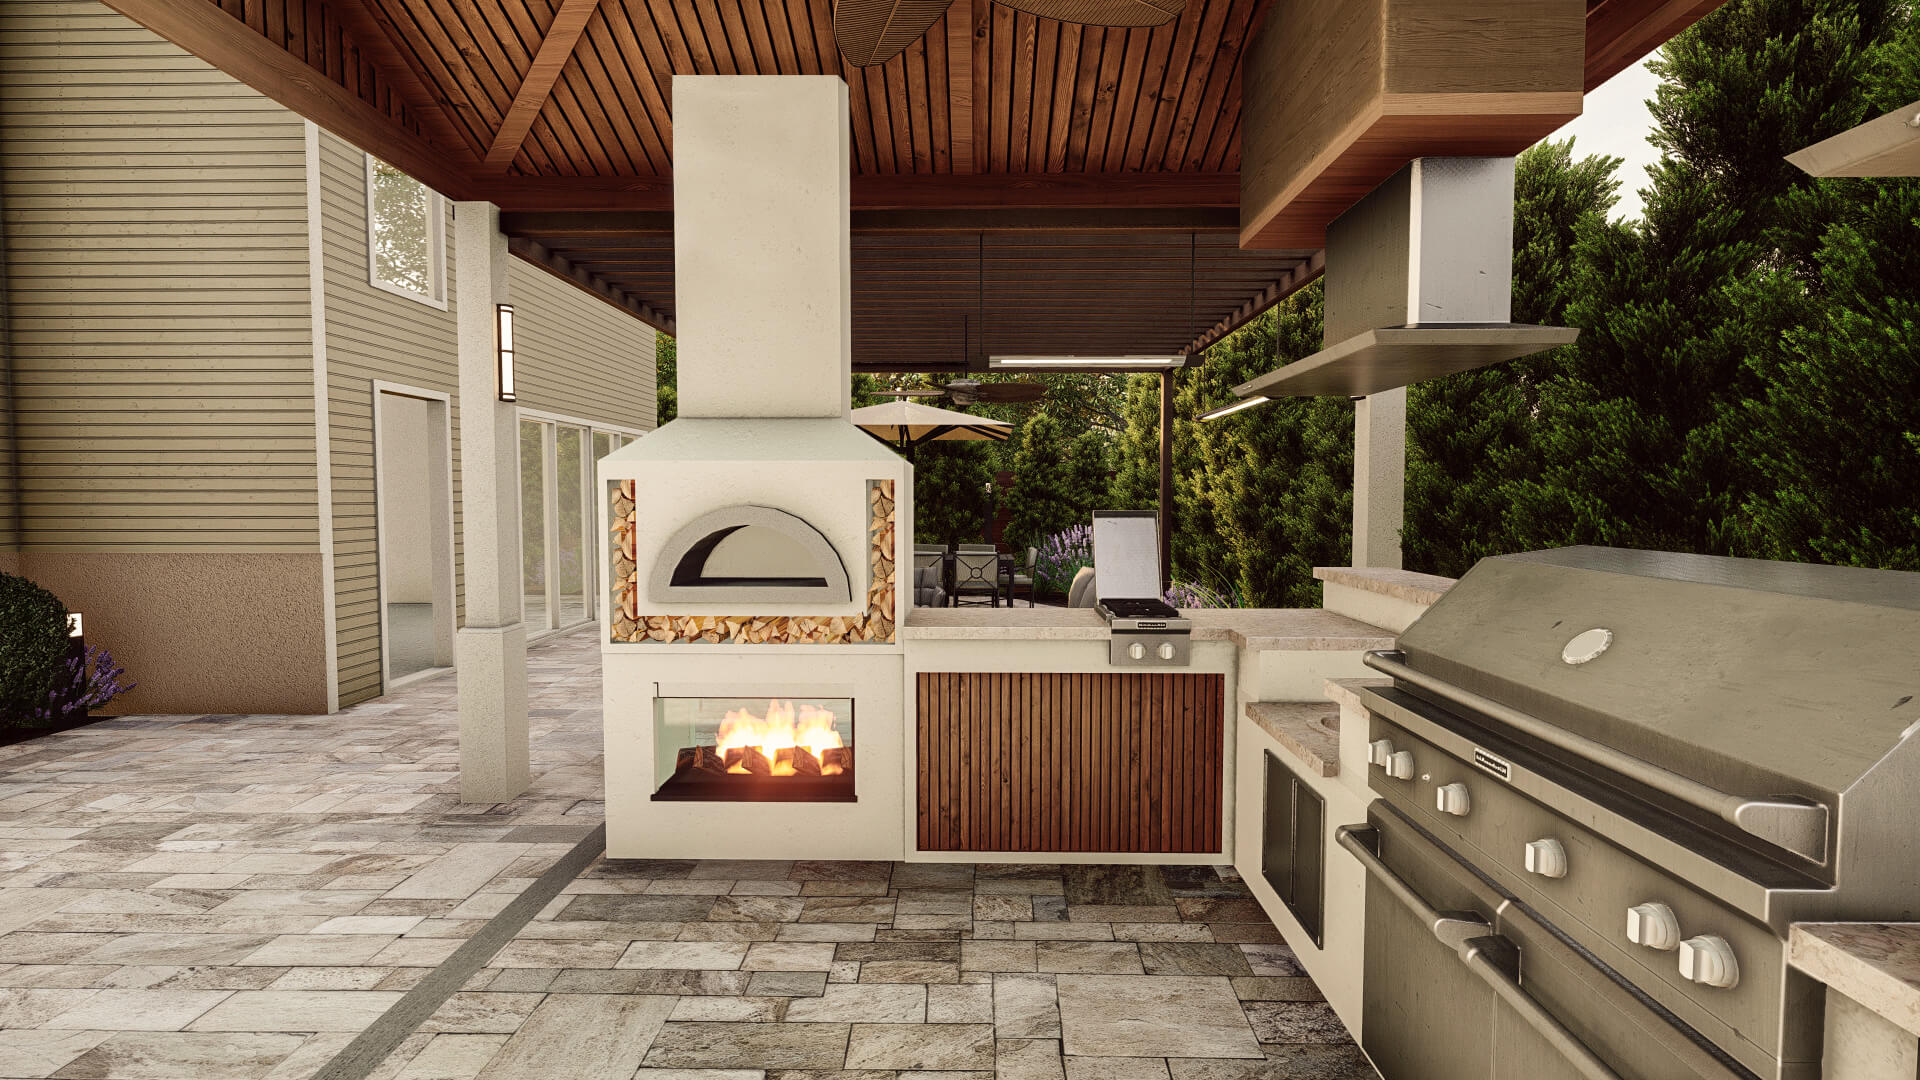 Mediterranean-style outdoor kitchen with a wood-fired pizza oven, built-in grill, and modern amenities set in a cozy patio.